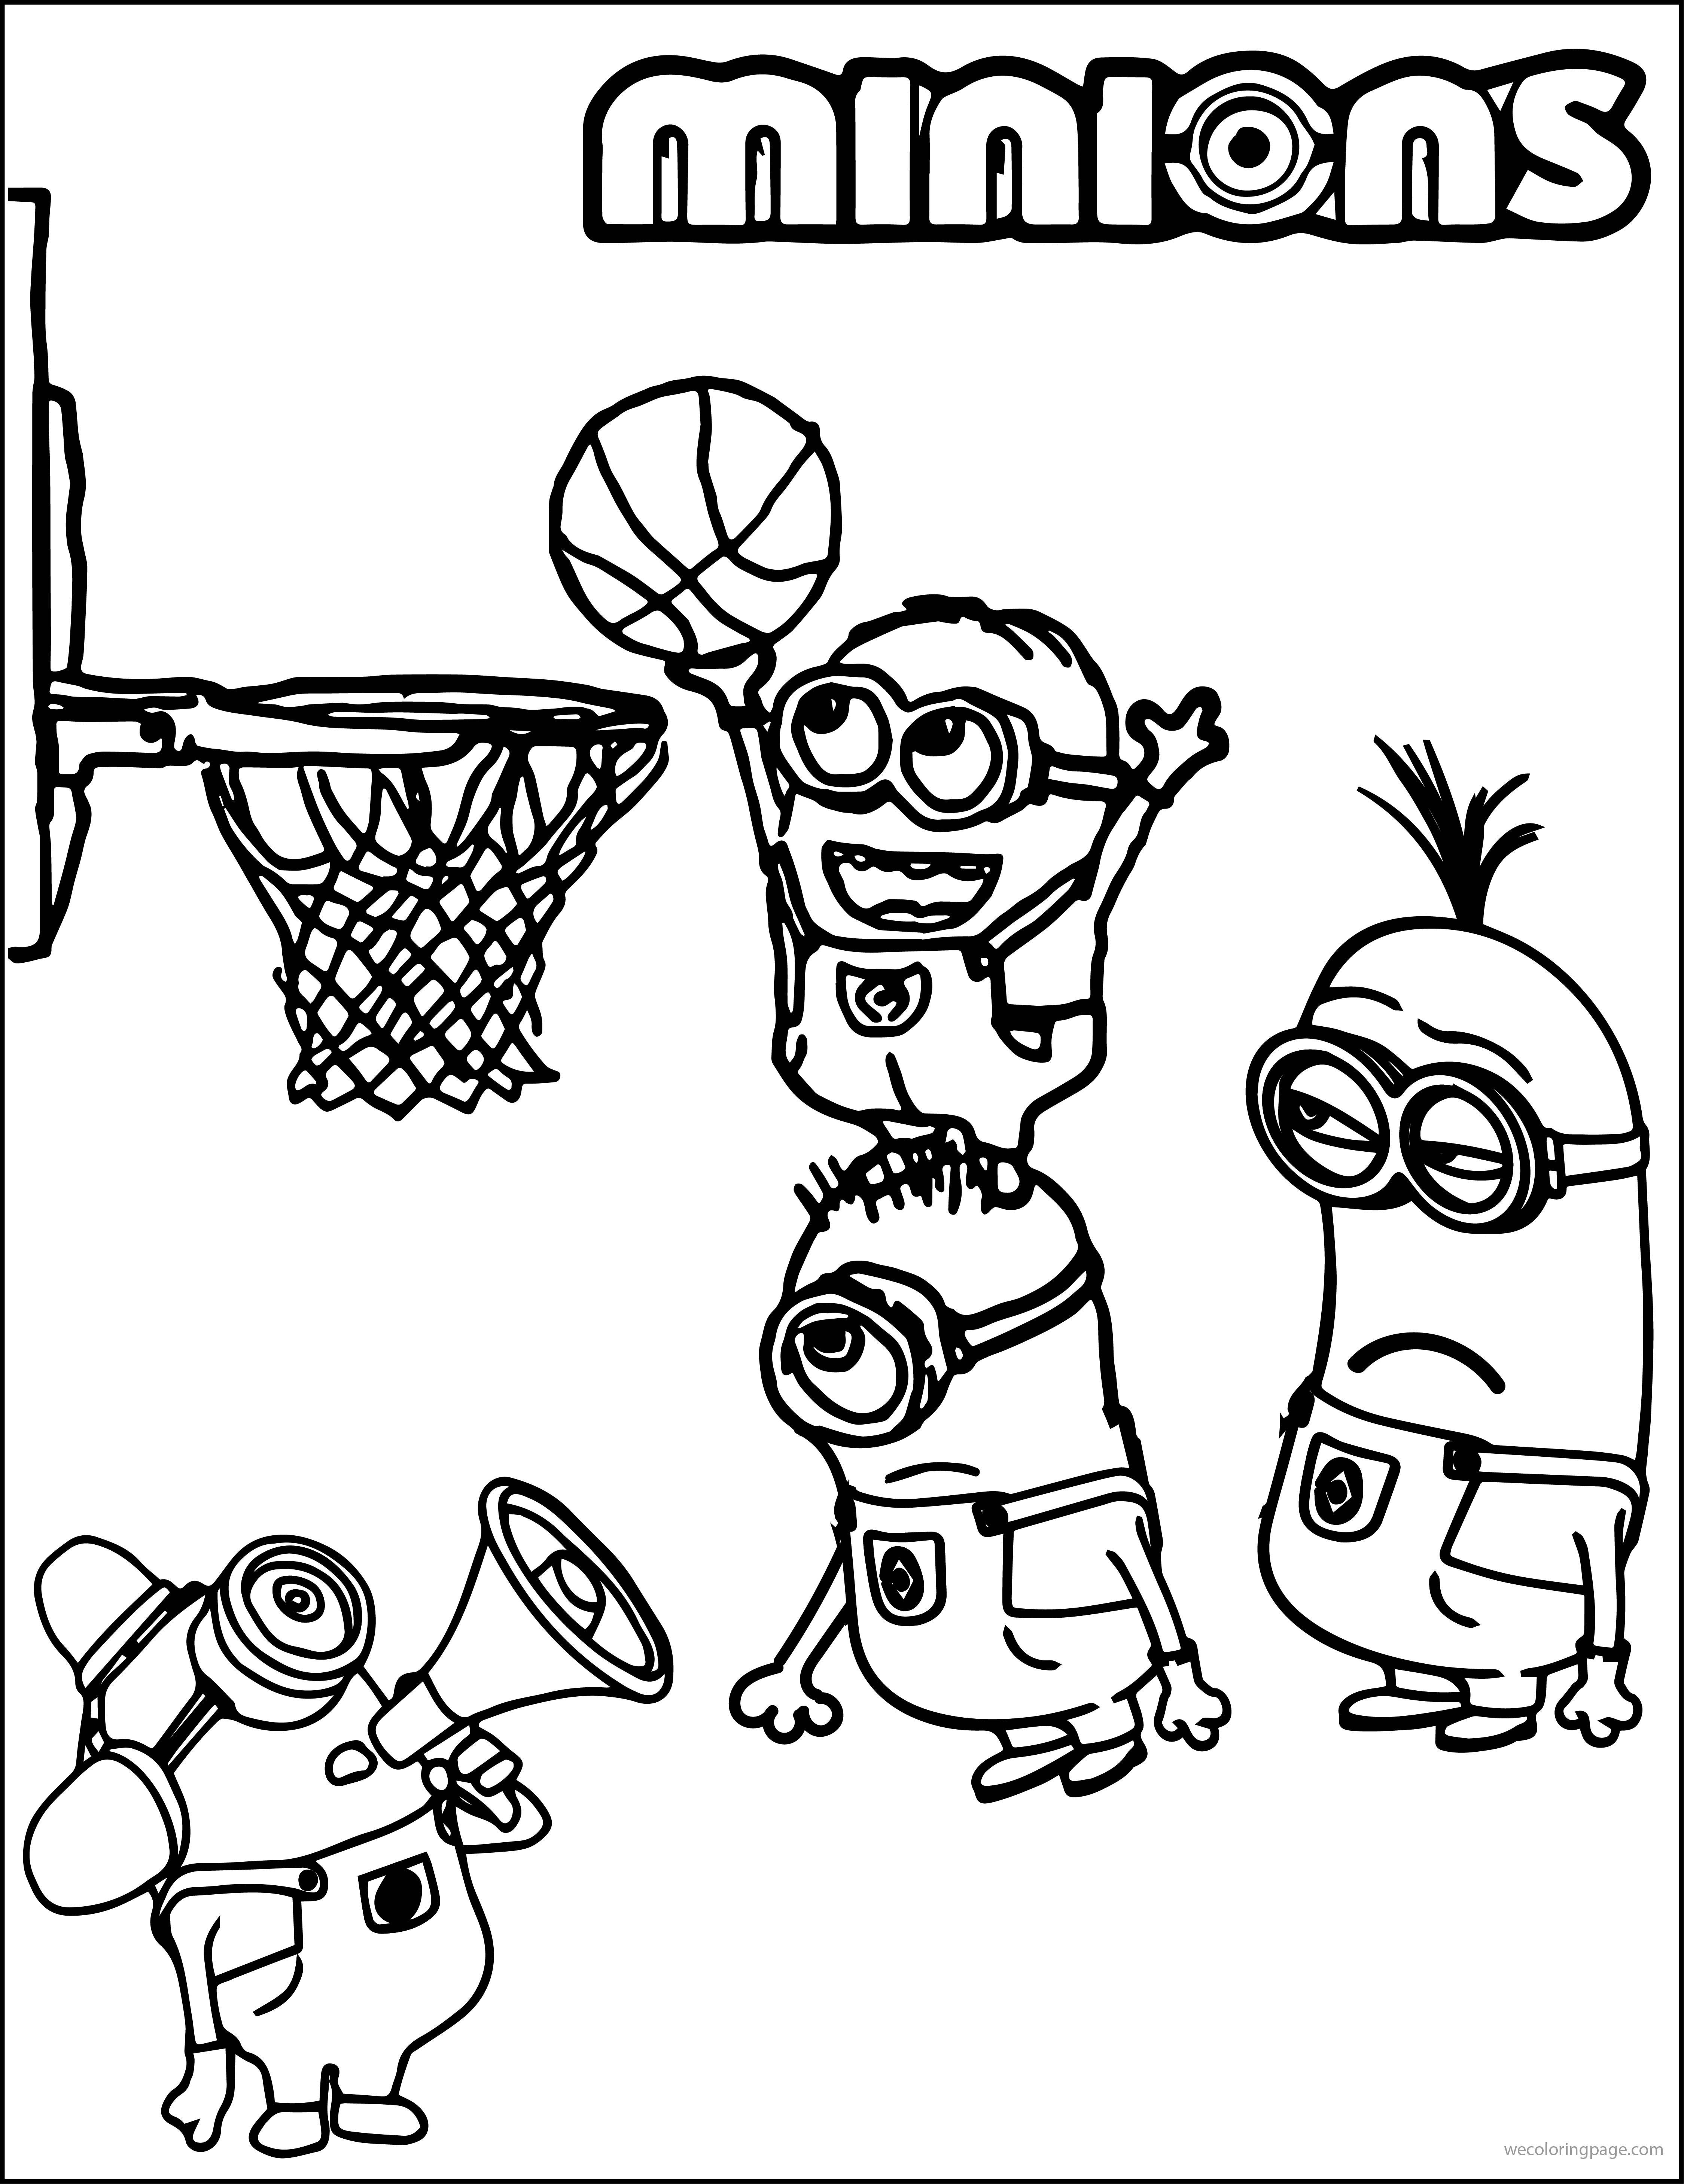 Minion Playing Basketball Coloring Pages